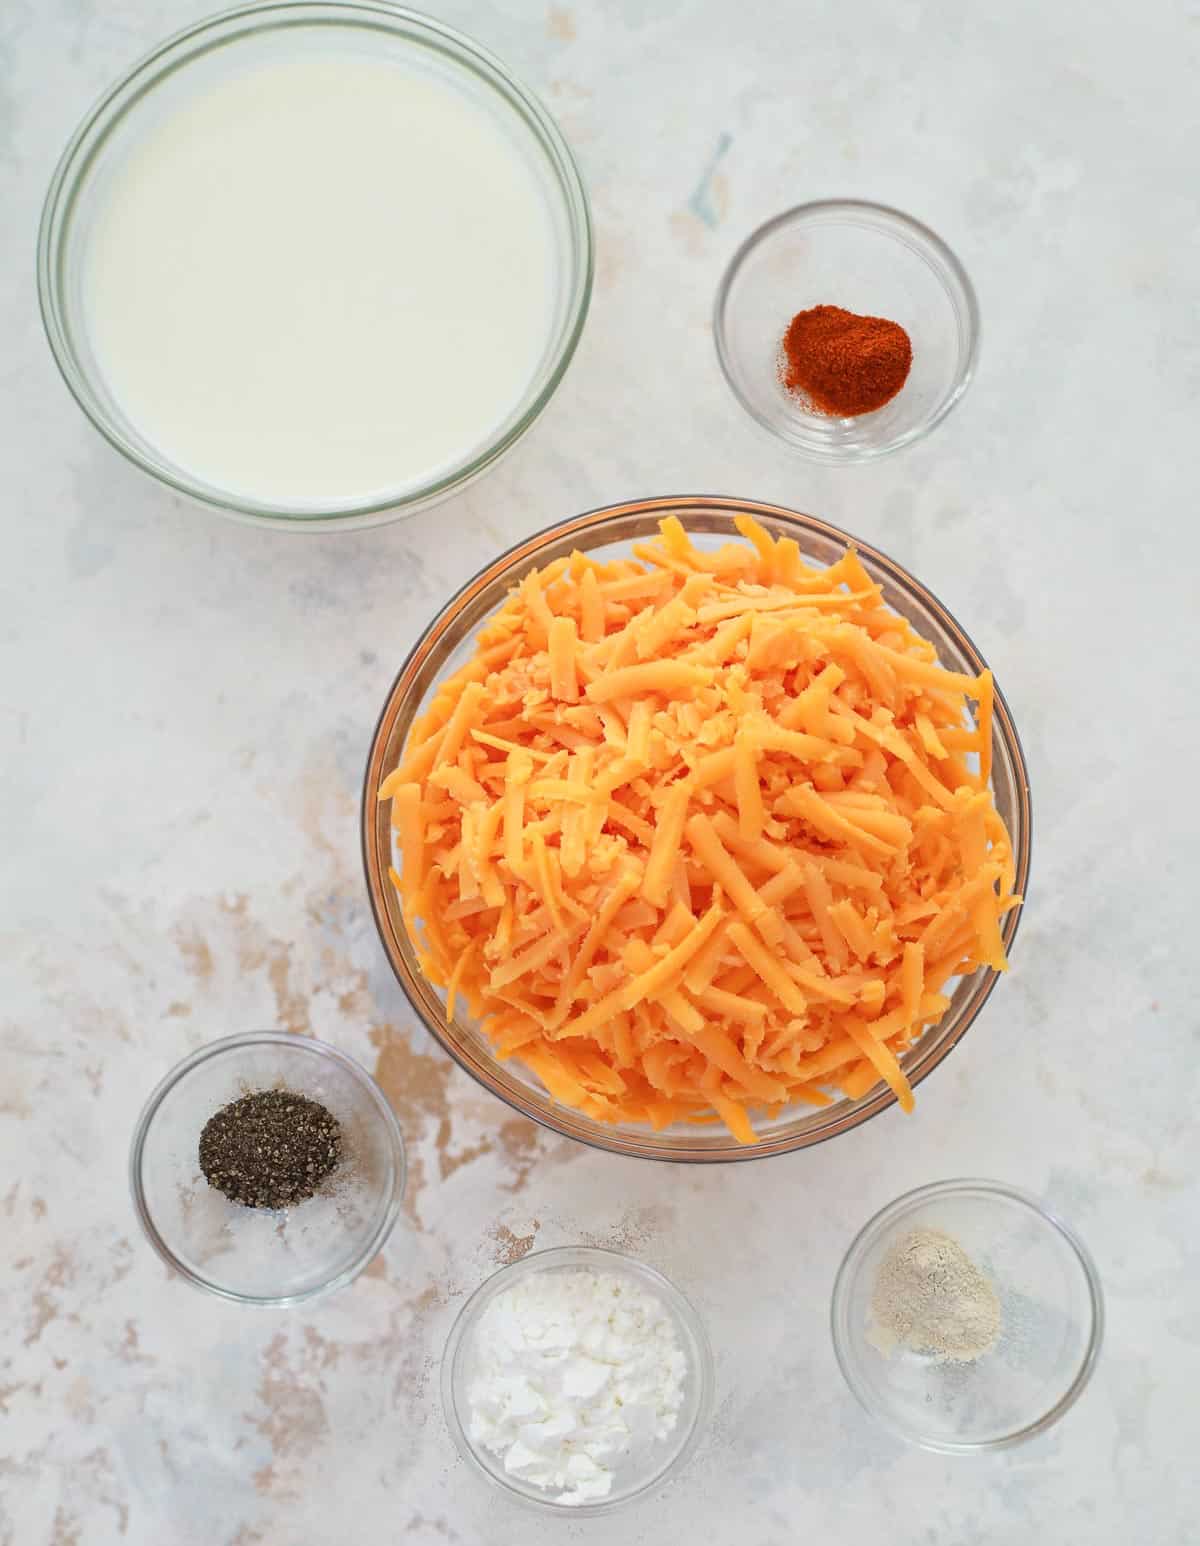 cheese sauce ingredients in separate glass bowls